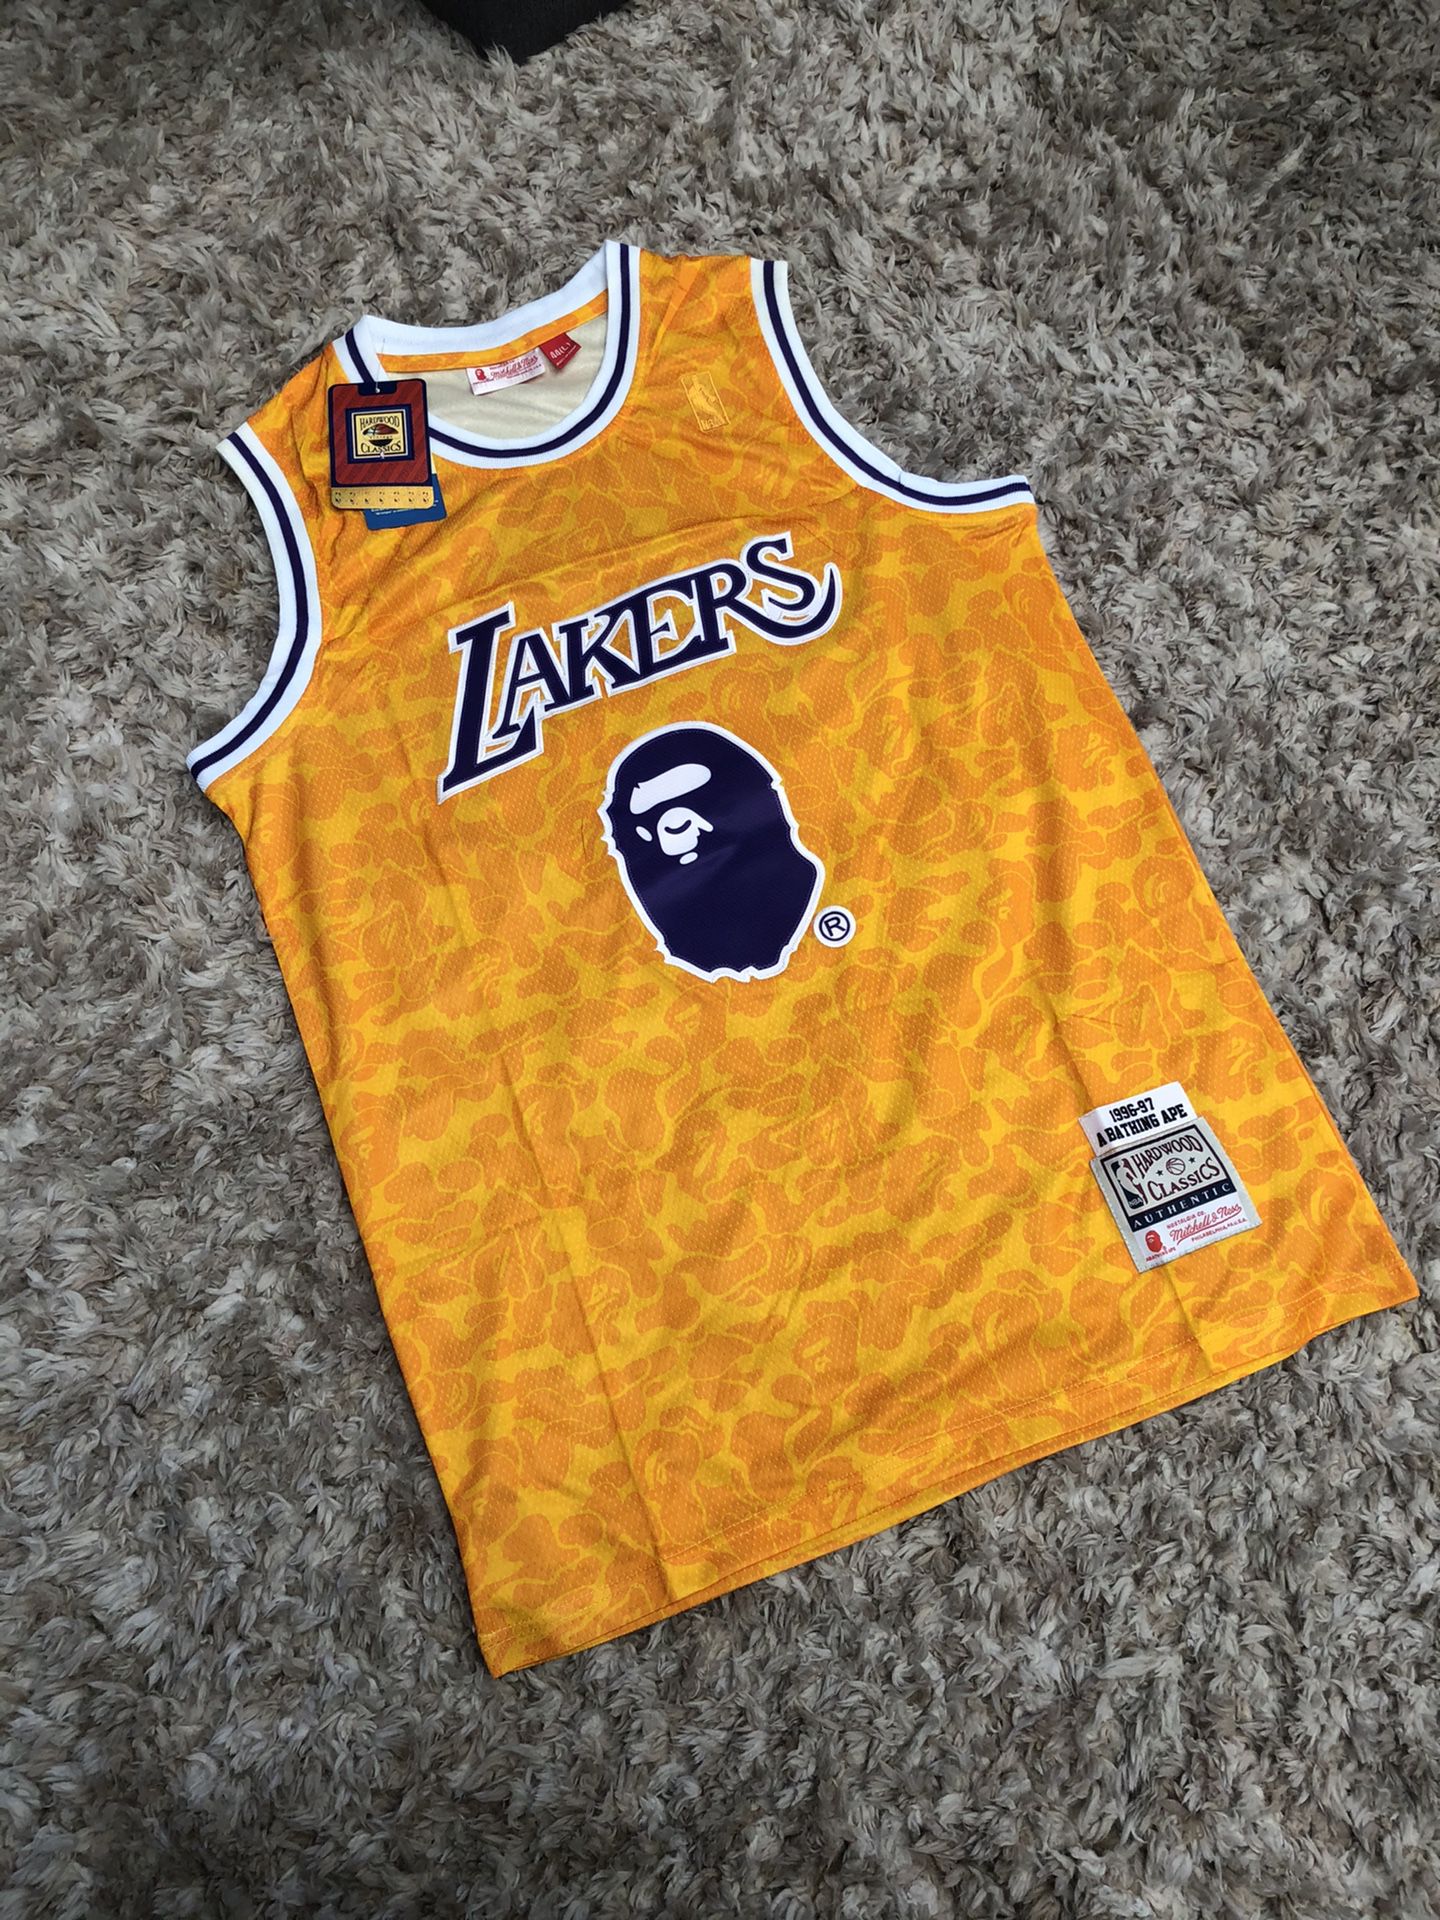 Bape Lakers Jersey for Sale in Greensboro, NC - OfferUp